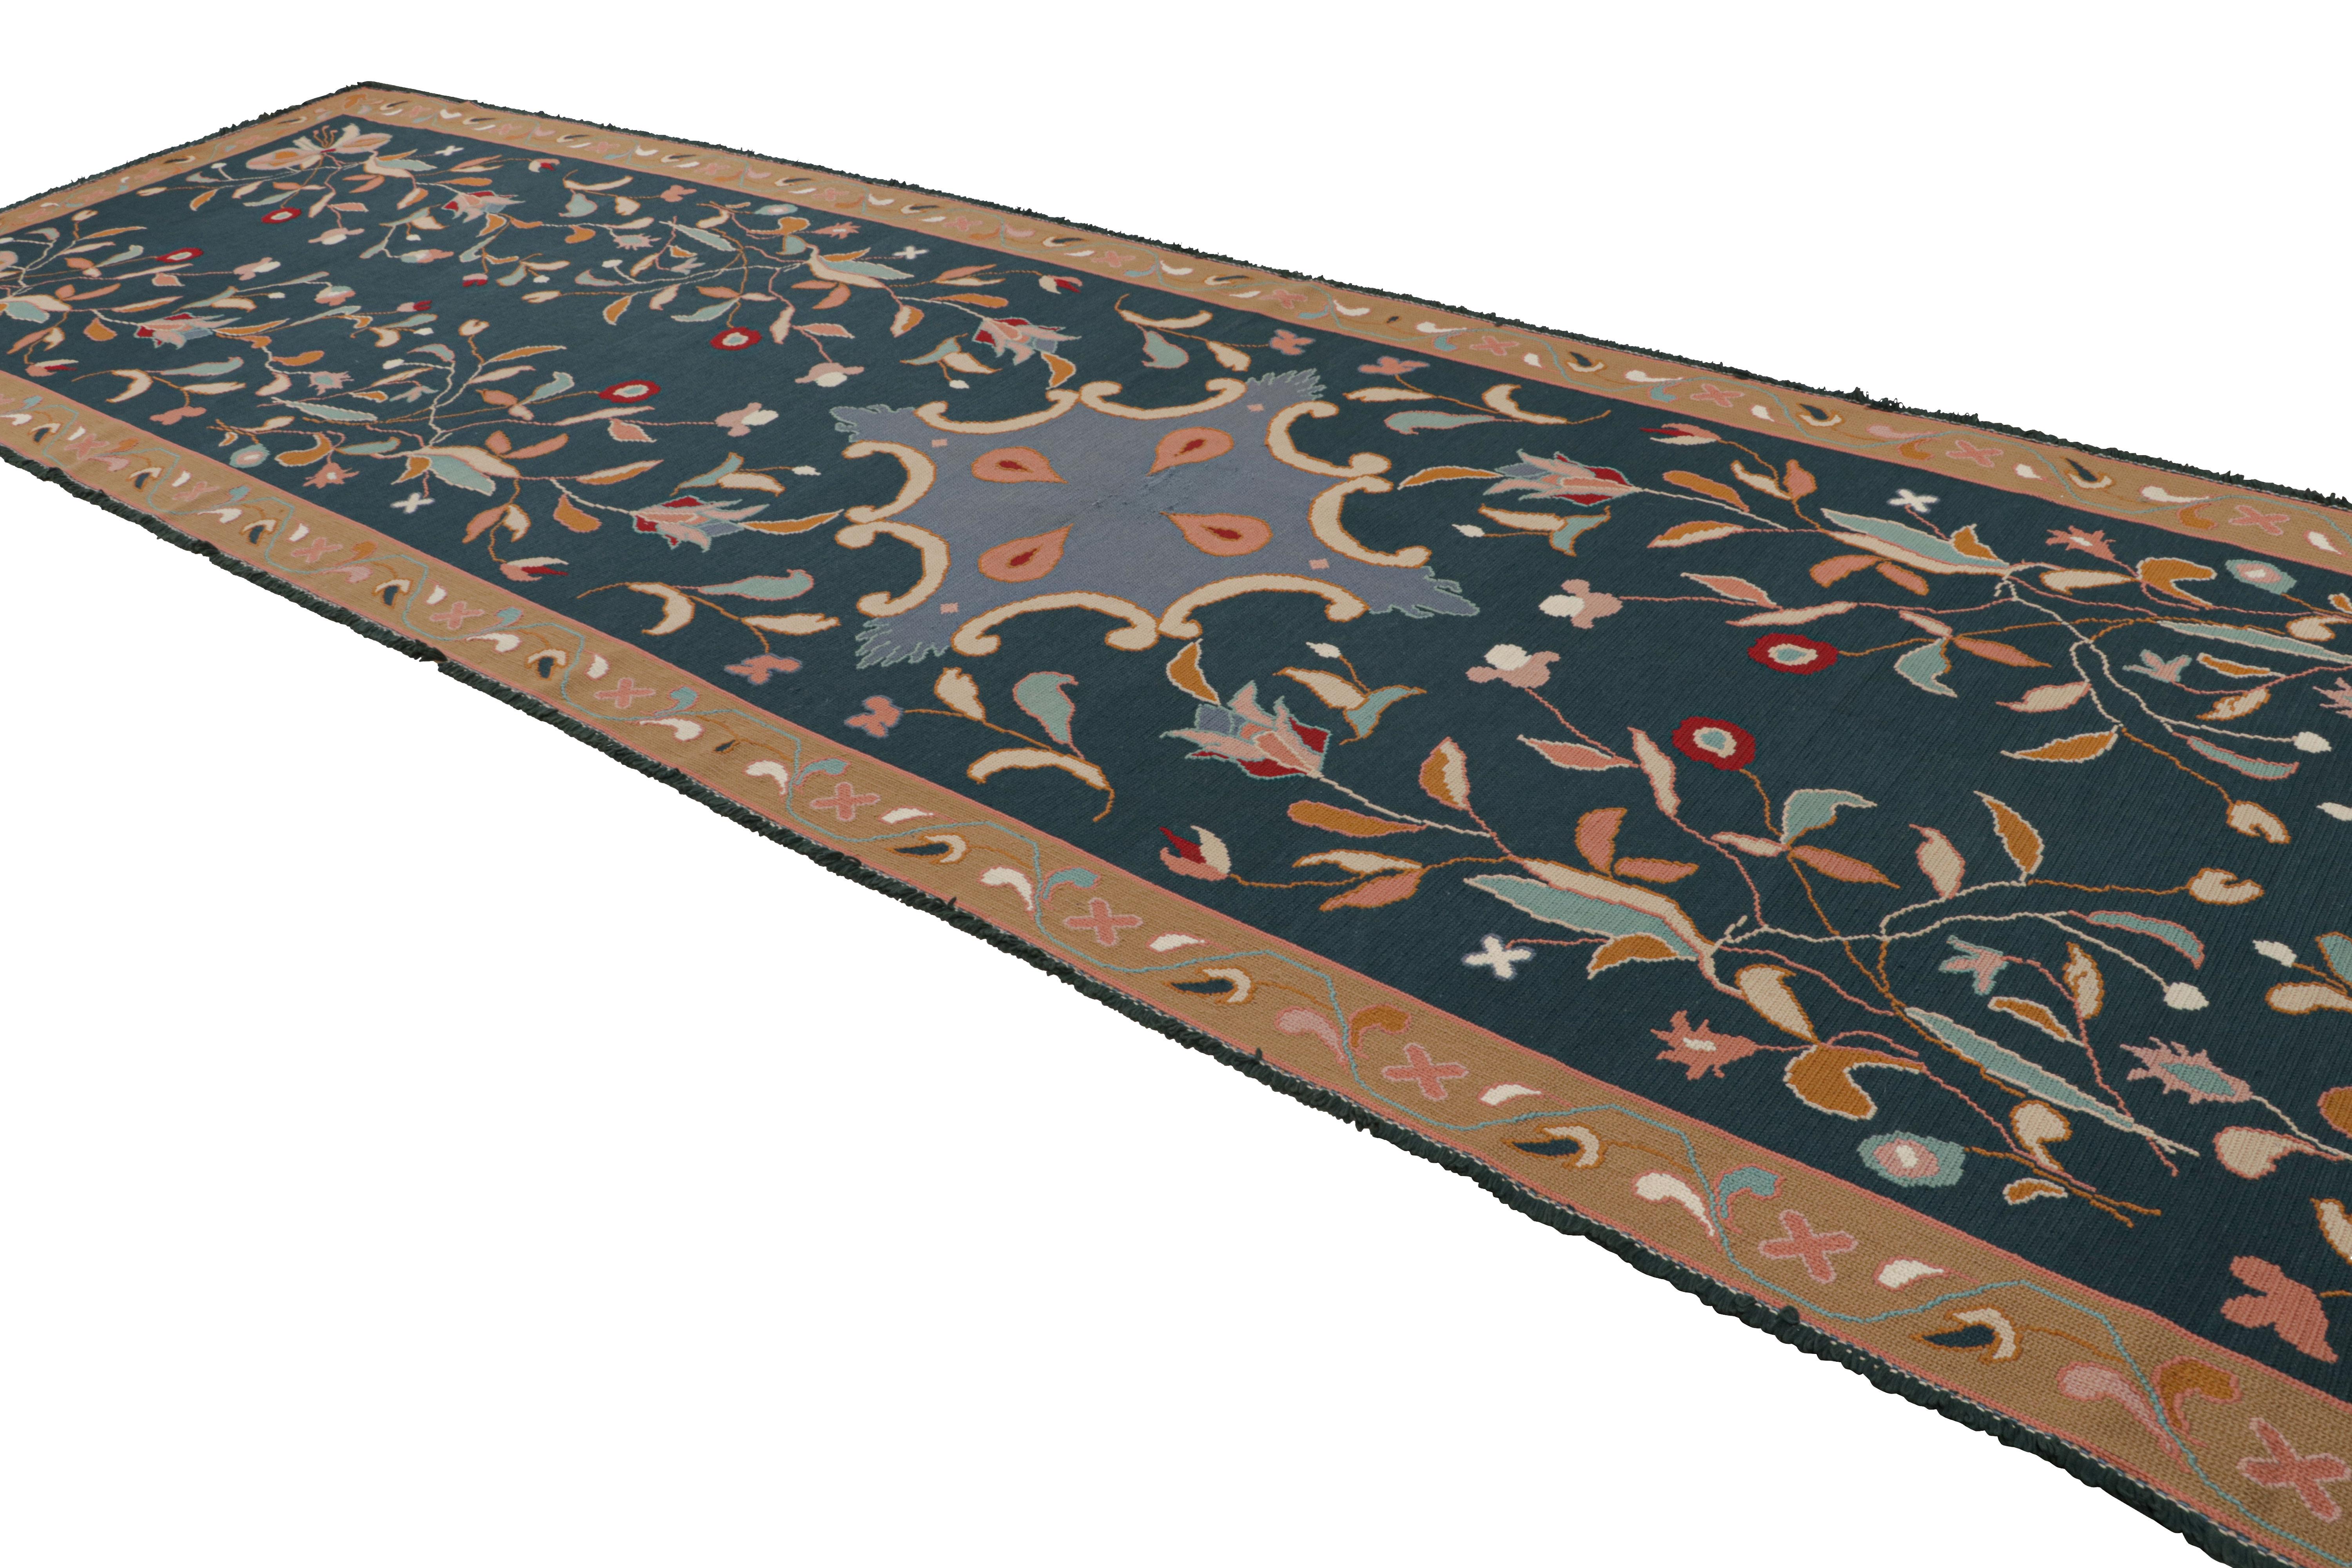 Portuguese Vintage Arraiolos Runner Rug in Blue With Floral Patterns, From Rug & Kilim For Sale